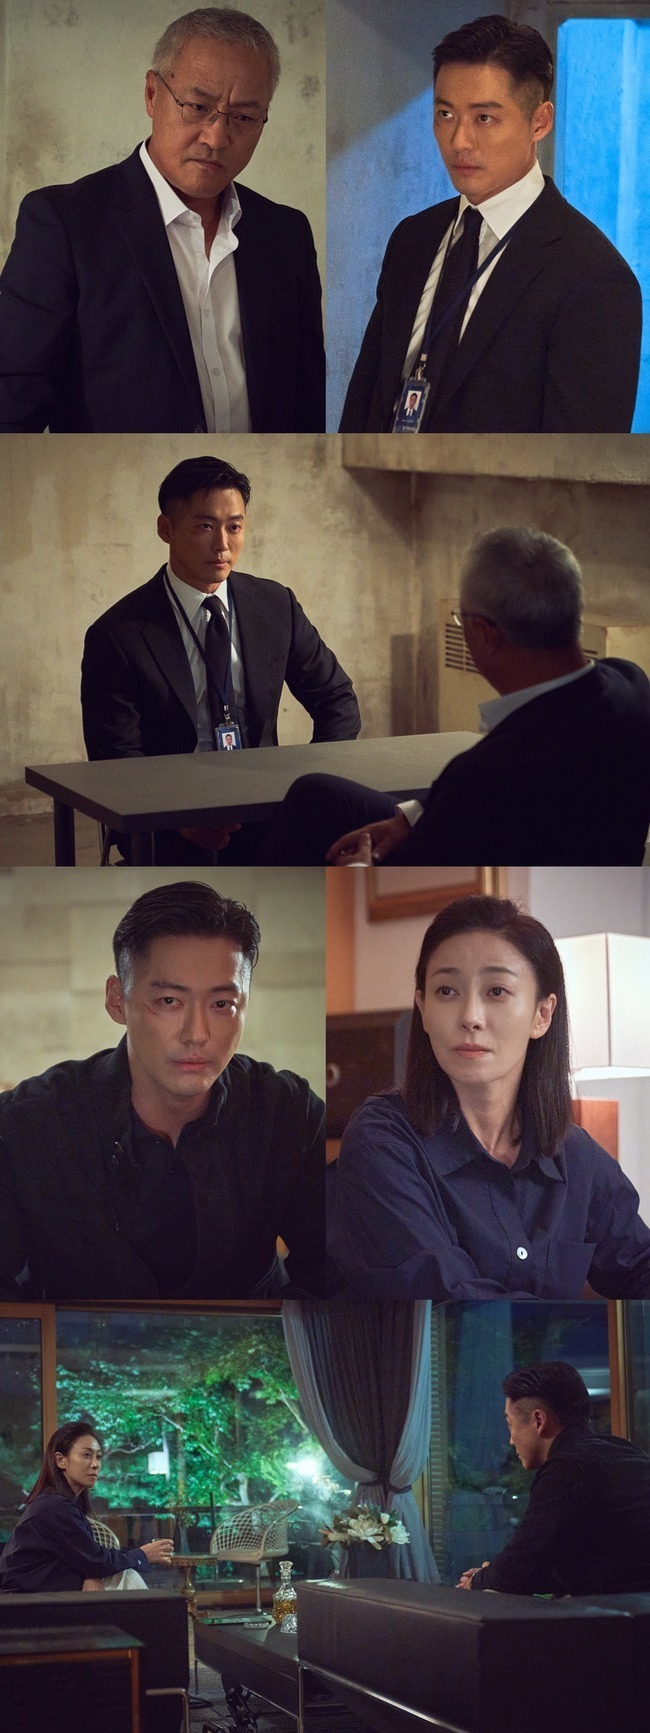 Black Sun Namgoong Min faces Lee Gyeung-young and Young-nam Jang respectivelyIn the 10th MBC gilt drama Black Sun (playplayed by Park Seok-ho/director Kim Sung-yong), which is broadcast on October 16, unexpected facts are revealed, and Han Ji-hyuk (Namgoong Min) is in a corner, meeting Lee In-hwan (Lee Gyeung-young) and Do Jin-sook (Young-nam Jang) who are at the extreme end of the NIS forces, and looking for the last enemy. I struggle for it.Han Ji-hyuk has revealed that the head of the business council composed of former NIS and current agents is Lee In-hwan, the first deputy director of the domestic part.A year ago, he was one step closer to the reality of an internal traitor who murdered his colleagues in Shenyang, but the situation was reversed when Han Ji-hyuks message video was released to him at the gathering of all NIS executives.Han Ji-hyuk in the video left a shocking statement, It was you who killed your colleagues that day ... Han Ji-hyuk! And this scene completed the previous-class ending with the highest audience rating of 10.4% at the moment (Nilson Korea, based on the metropolitan area furniture).In the meantime, Han Ji-hyuk, who sat opposite Lee In-hwan, was captured.Attention is focusing on what Lee In-hwan, who has been pushing the breath of Han Ji-hyuk and his partner Yoo Jae-yi (Kim Ji-eun) while revealing the people of power desire, said, and how he, the head of the Chamber of Commerce, is closely related to the Shenyang incident a year ago.In addition, the face-to-face encounter between Do Jin-sook and Han Ji-hyuk, who have stepped down from the position of the second deputy director of overseas parts, attracts attention.Previously, Han Ji-hyuk pointed out Do Jin-sook as a person who committed murder to his colleagues and put him in crisis, but she strongly denied it.Han Ji-hyuk, who still has no doubt, and Do Jin-suks expression, which seems more relaxed, contrasts and creates a strange atmosphere.